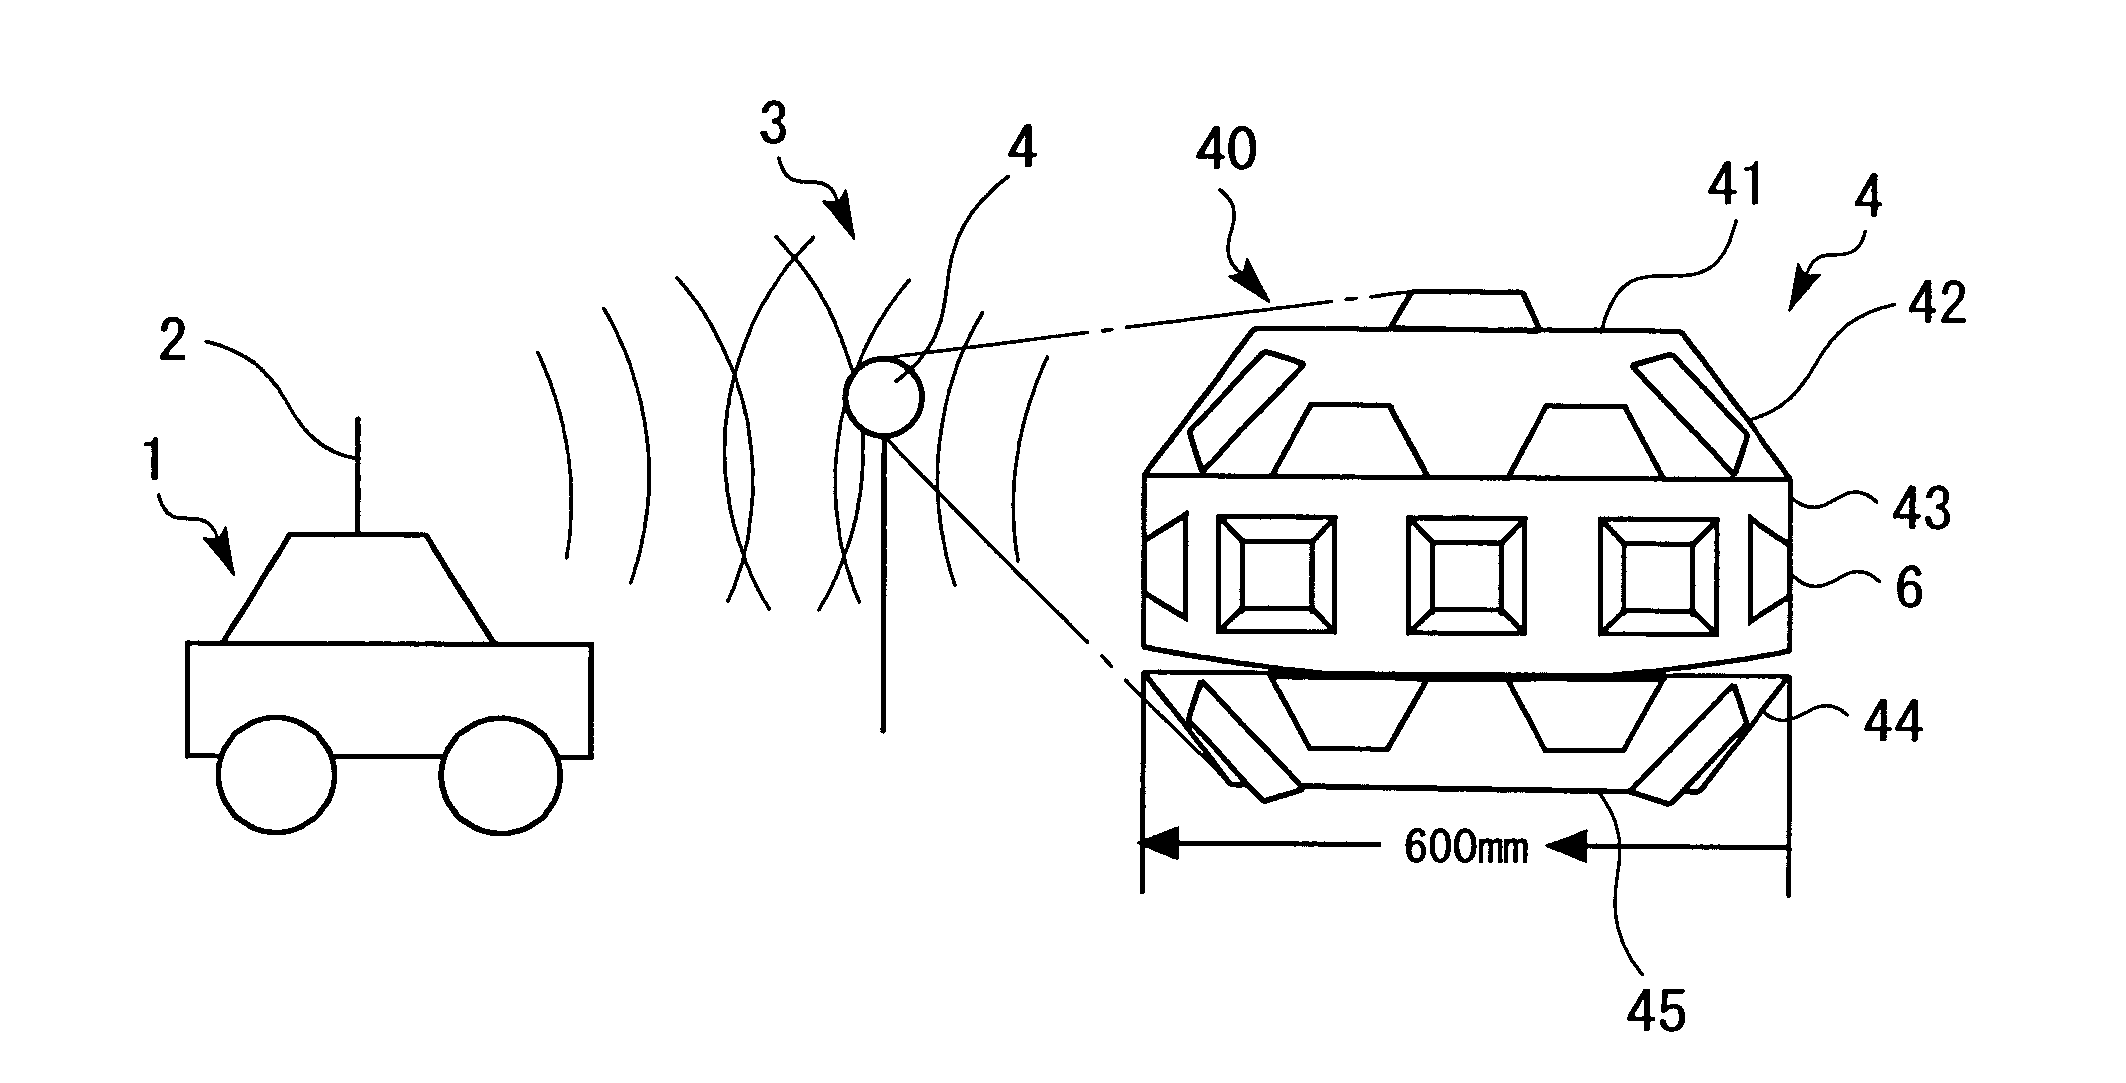 Directional antenna device